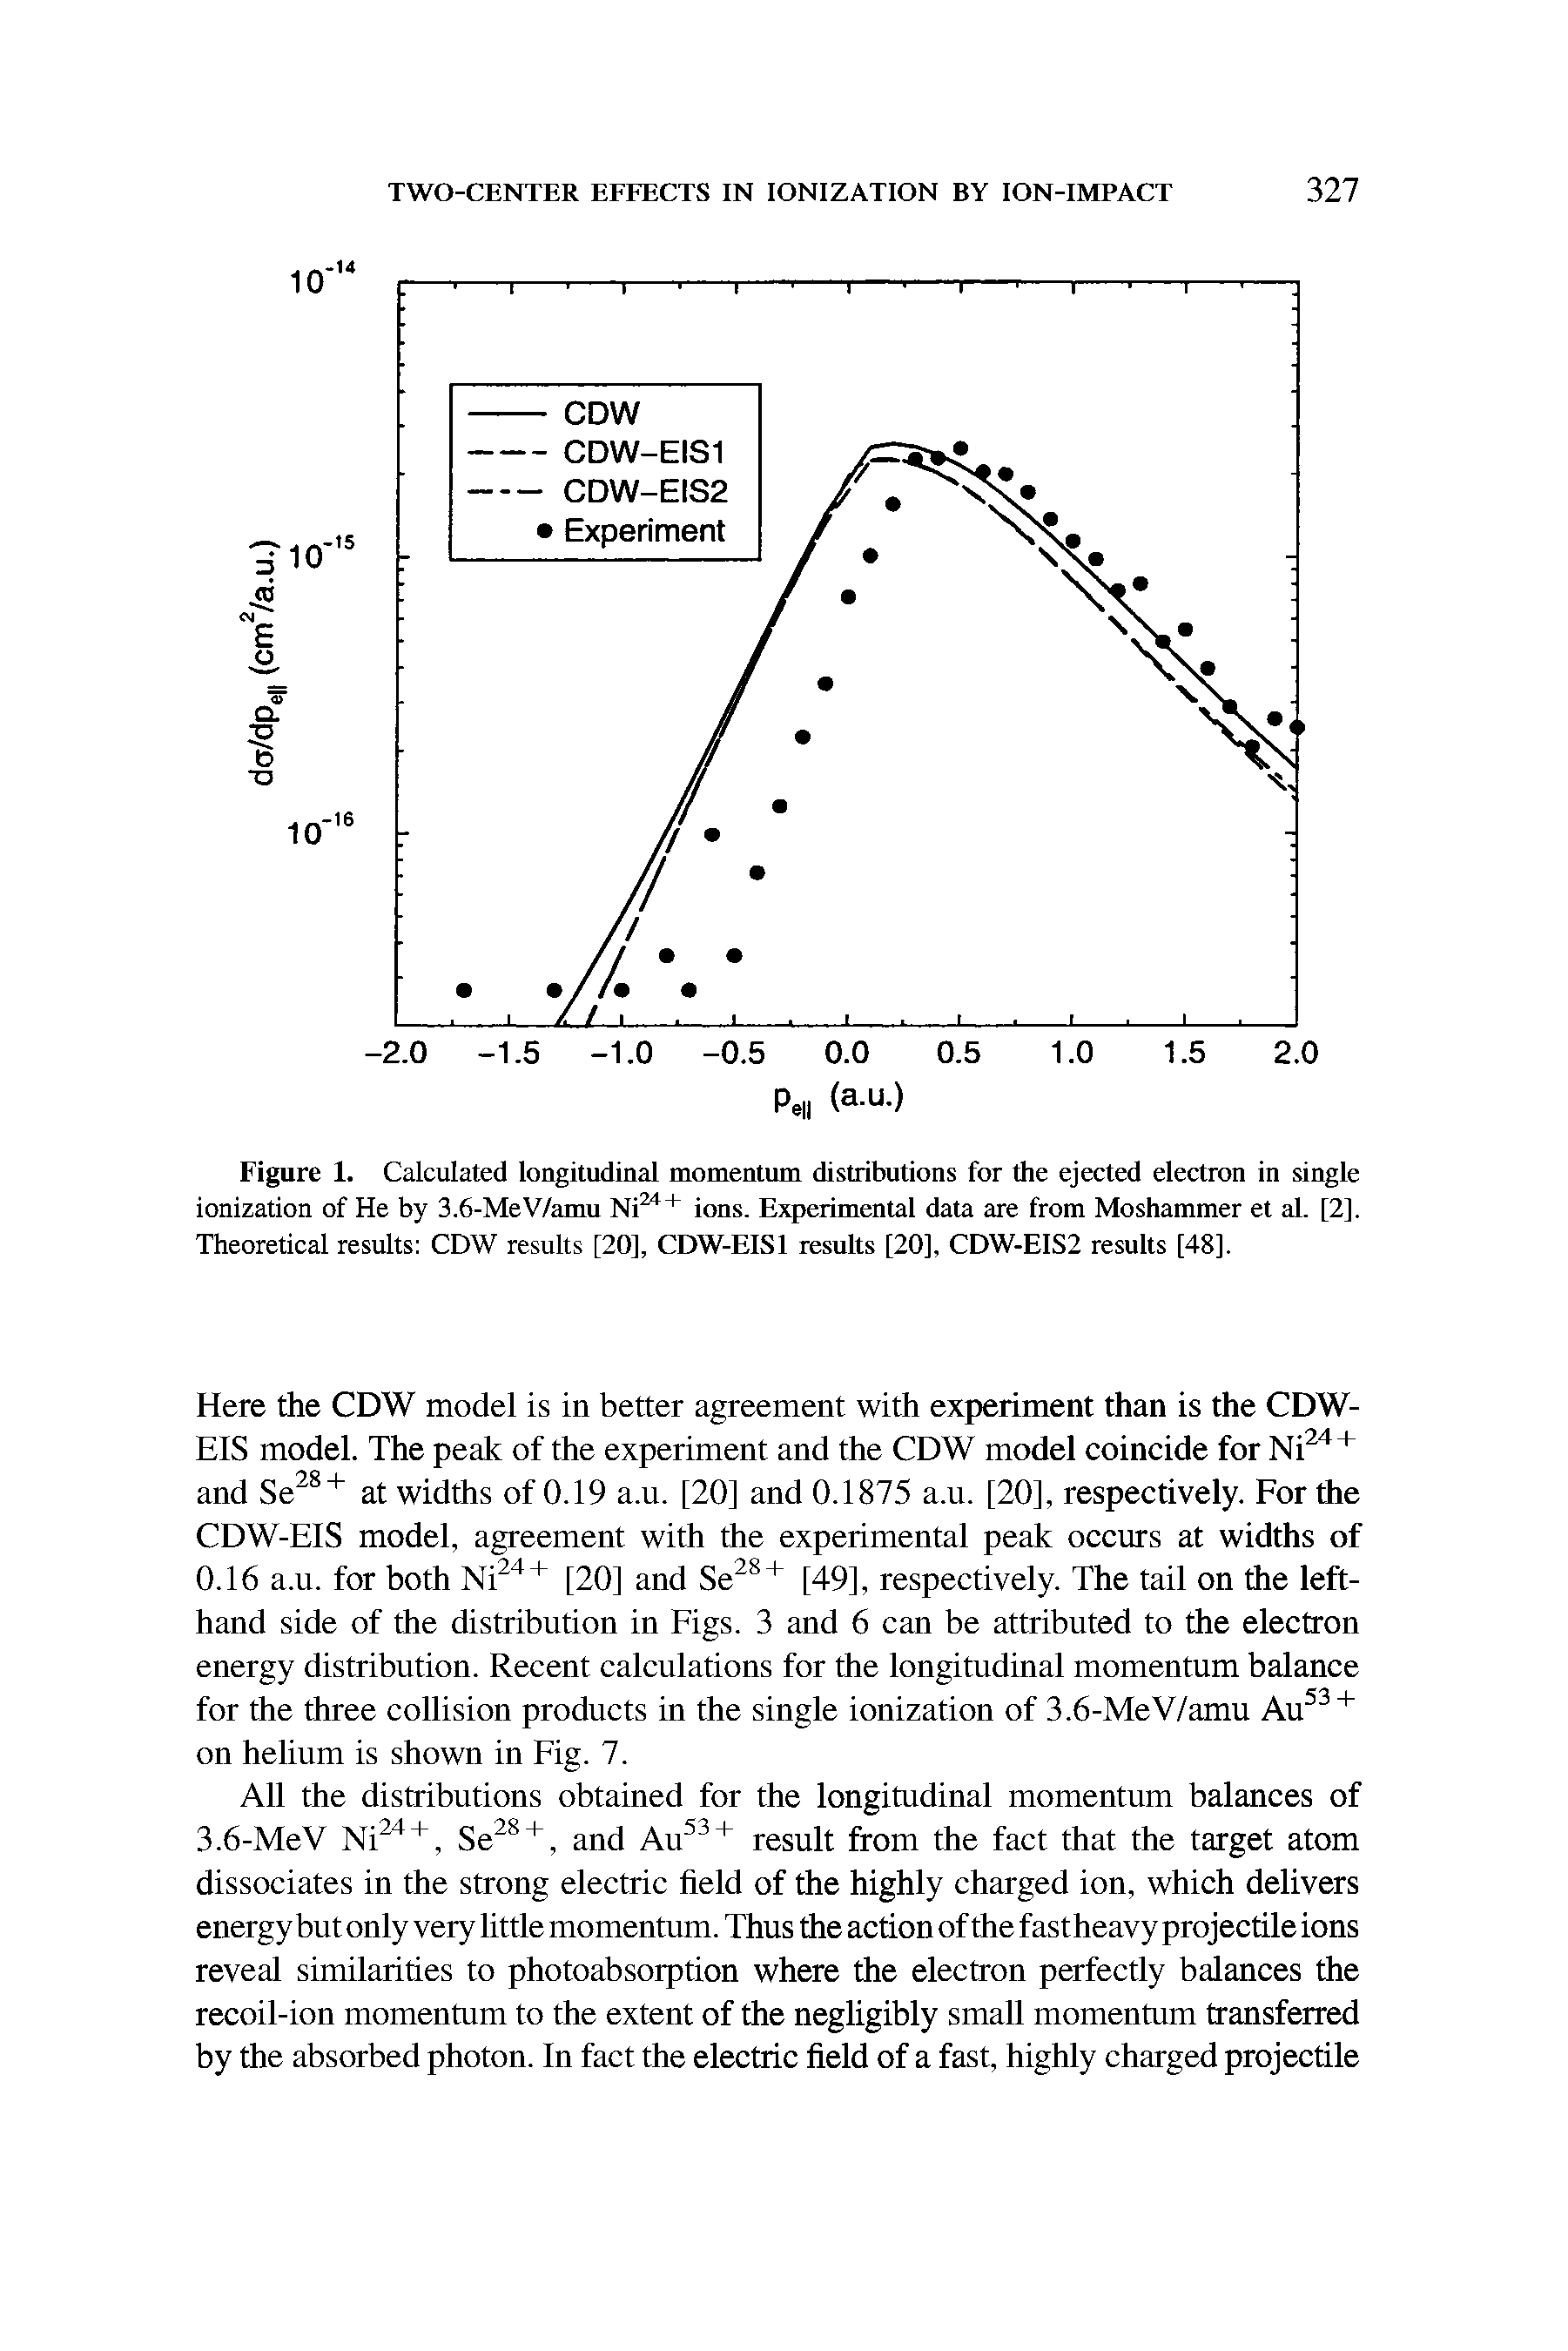 Figure 1. Calculated longitudinal momentum distributions for the ejected electron in single ionization of He by 3.6-MeV/amu Ni24+ ions. Experimental data are from Moshammer et al. [2], Theoretical results CDW results [20], CDW-EIS1 results [20], CDW-EIS2 results [48].